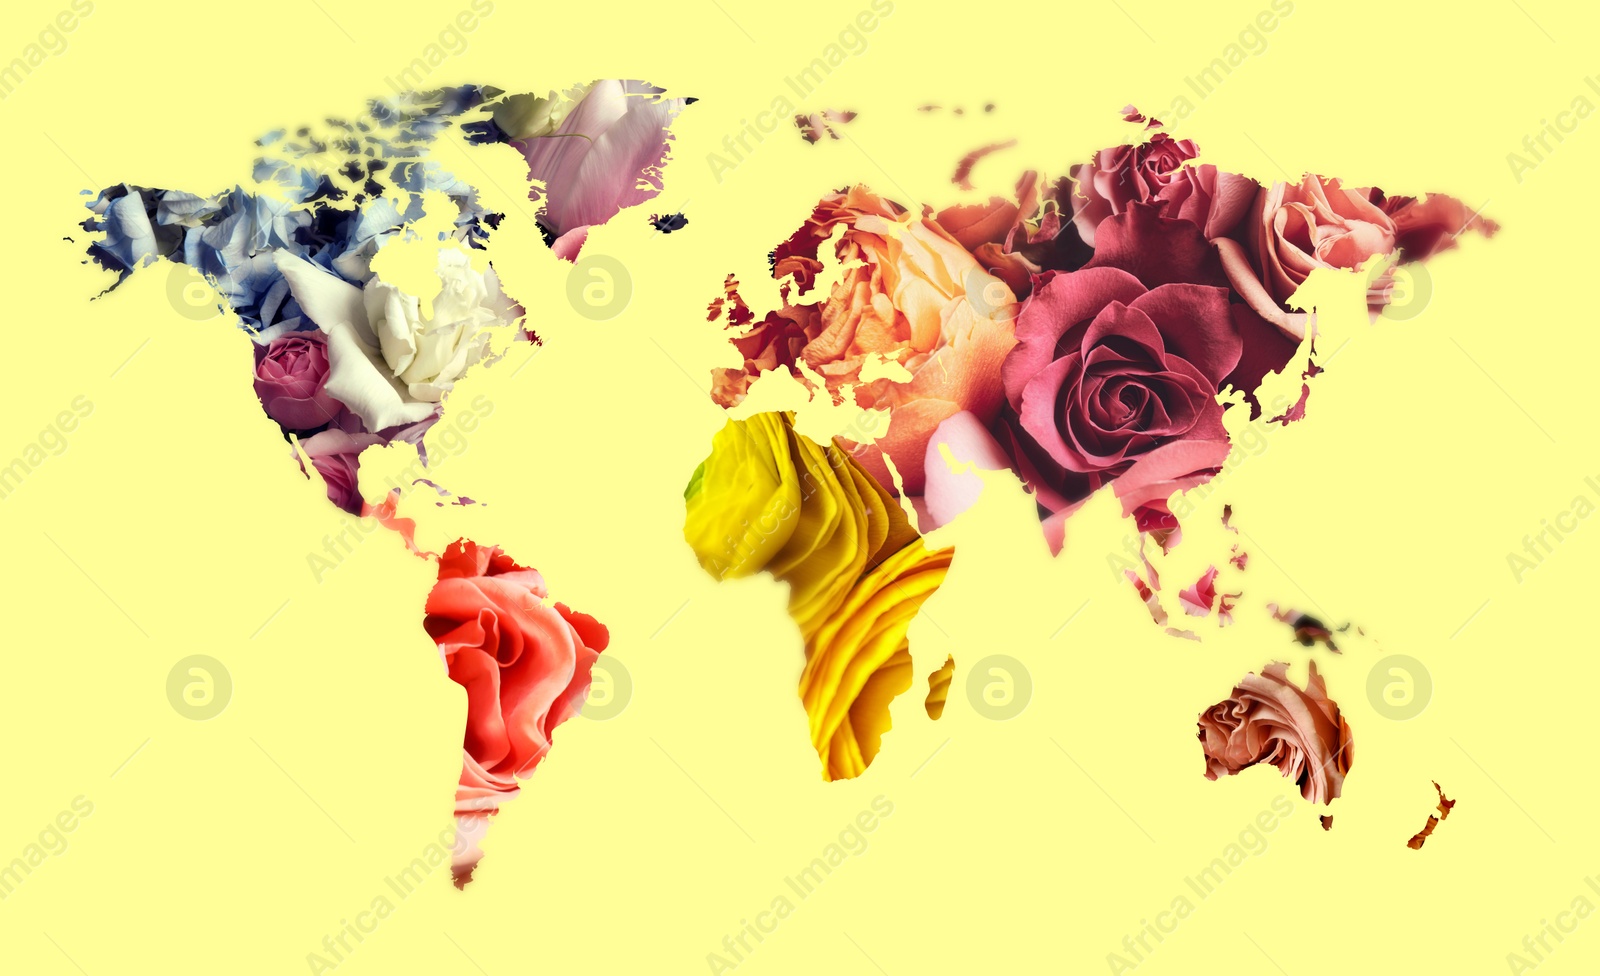 Image of World map made of beautiful flowers on yellow background, banner design